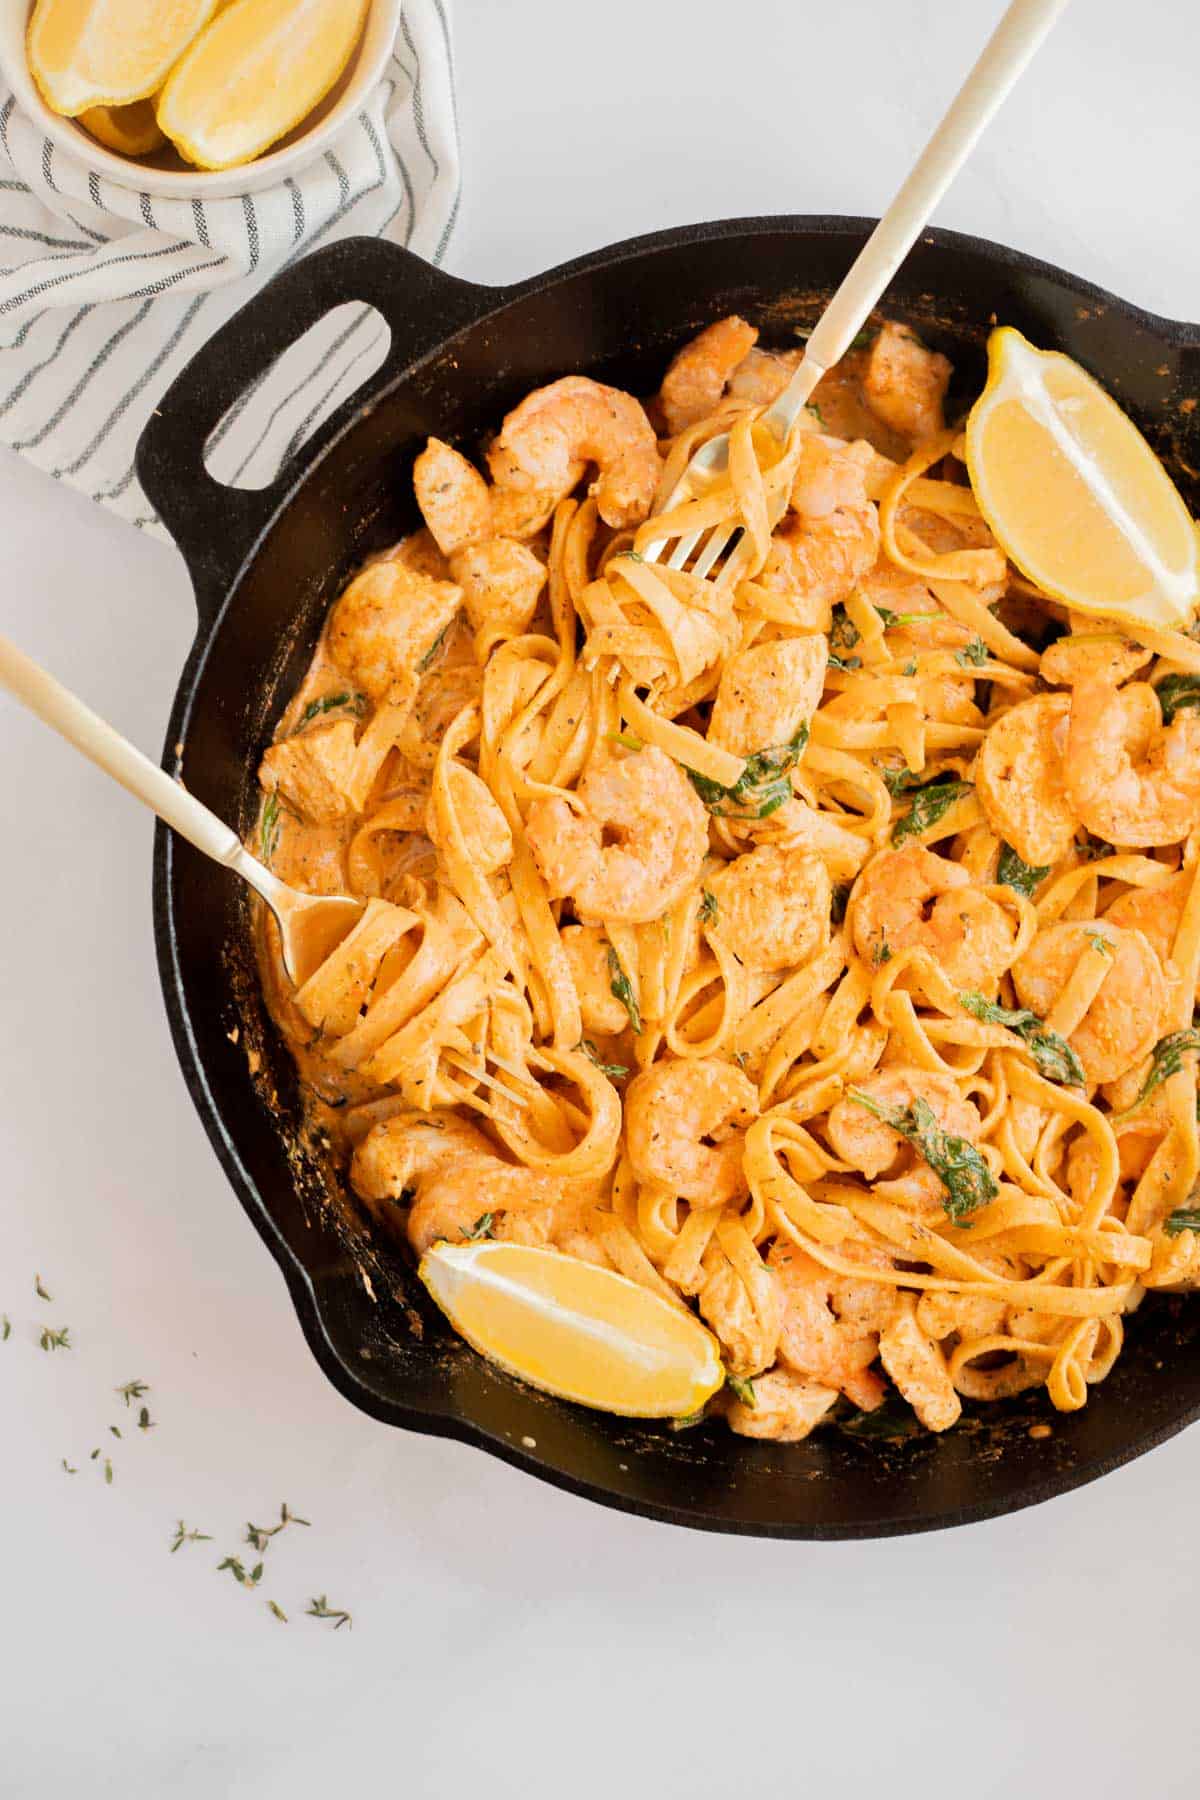 cajun chicken and shrimp pasta in a cast iron skillet with two forks.